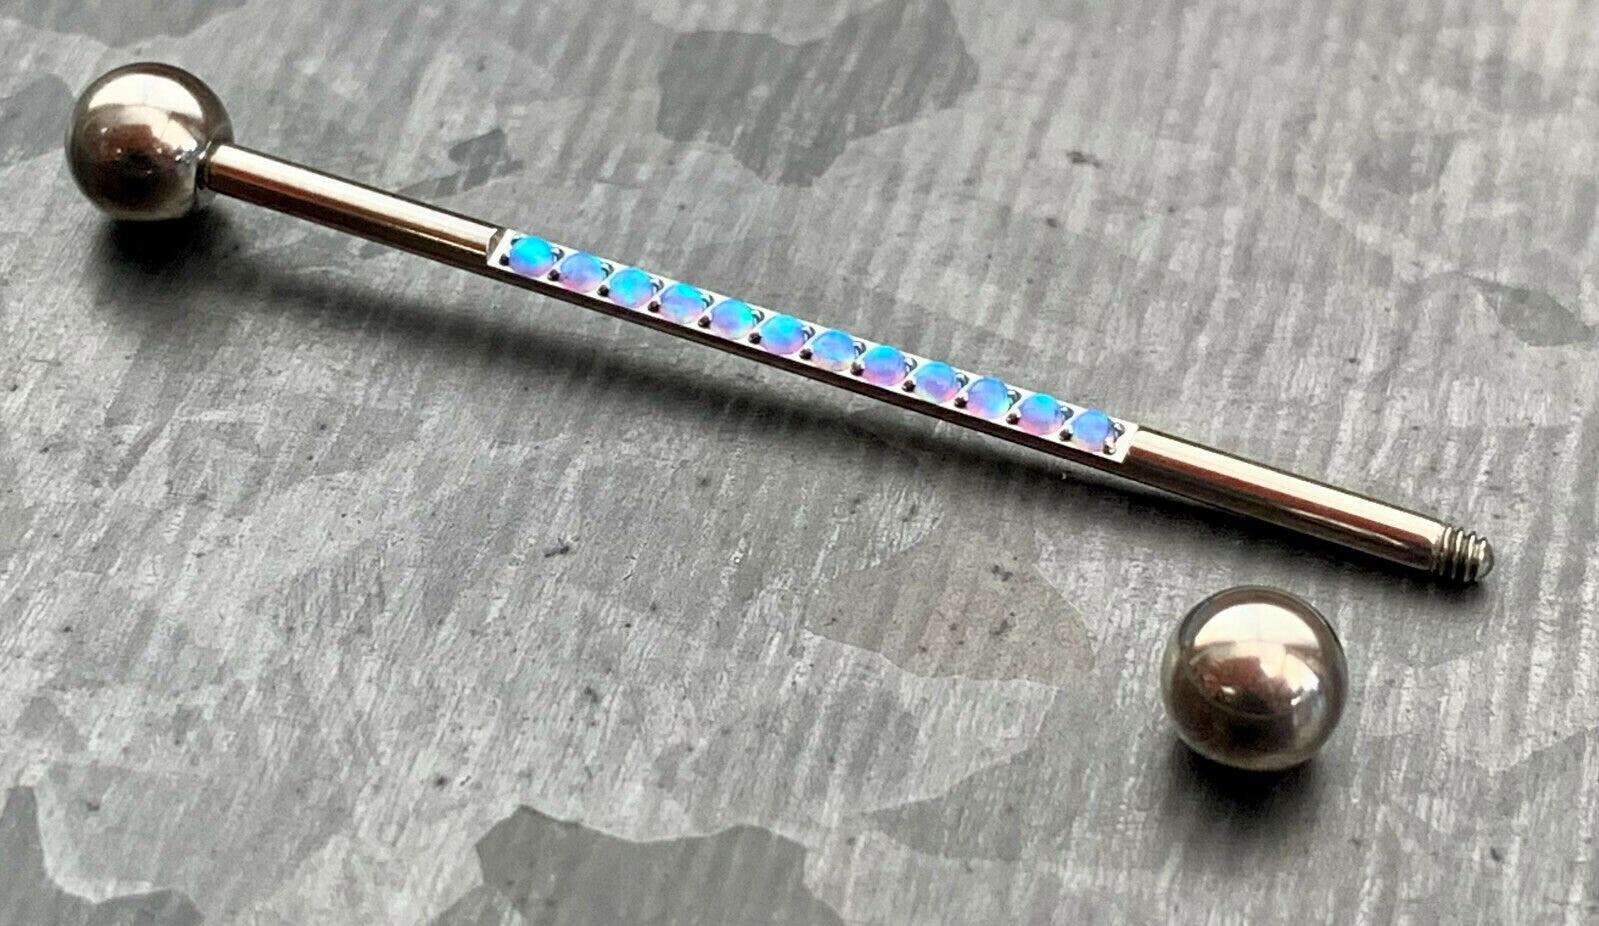 1 Piece of Implant Grade Titanium CNC Set Lined Opals Industrial Barbell - 14g, Length 38mm 1.5" - Silver, Black, Gold, and Rose Gold!!